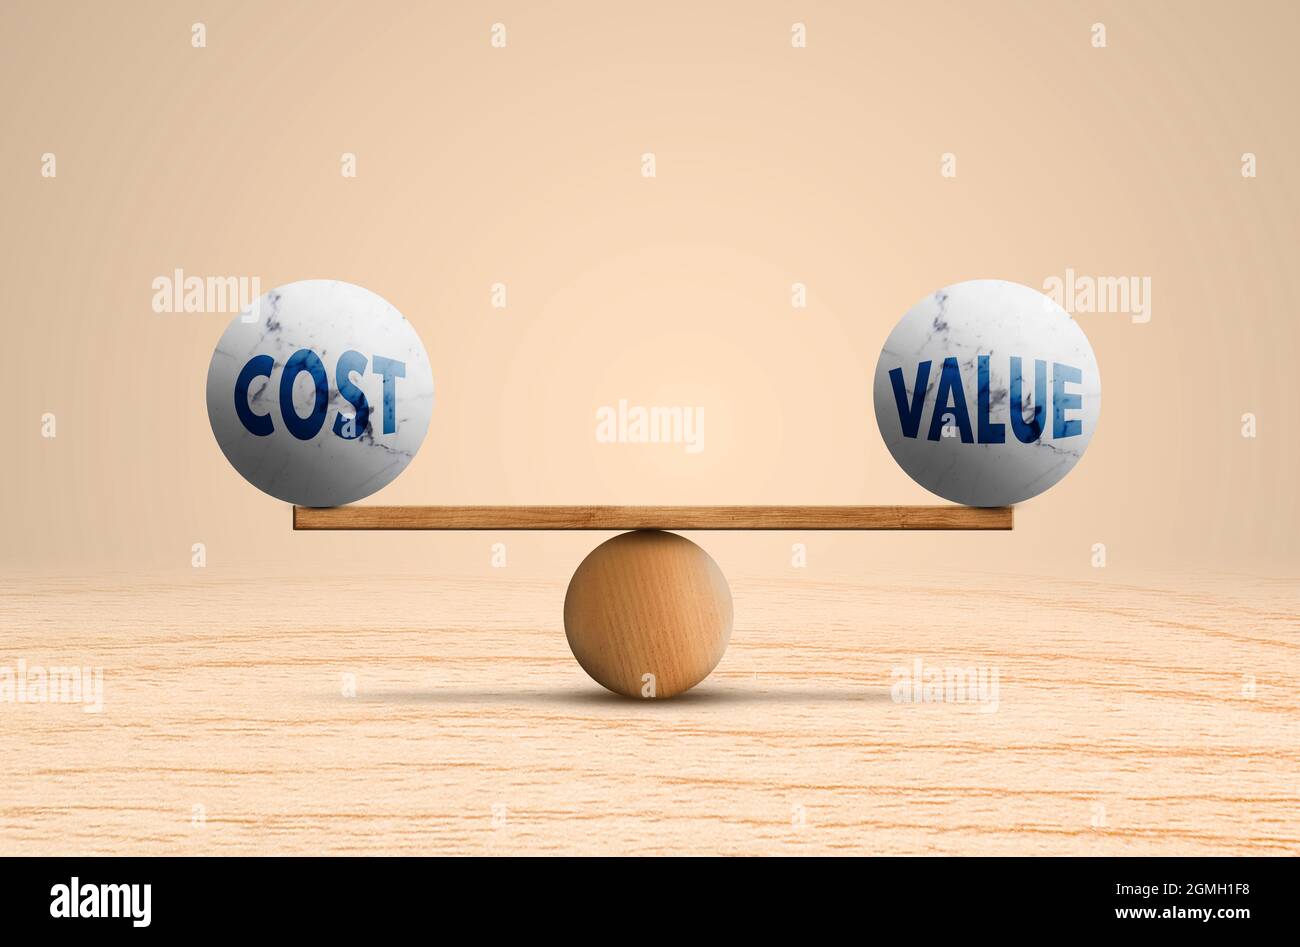 Cost and Value On Ideal balance in Wooden scale on wood floor and brown background. Cost Value Equal Equilibrium Stock Photo